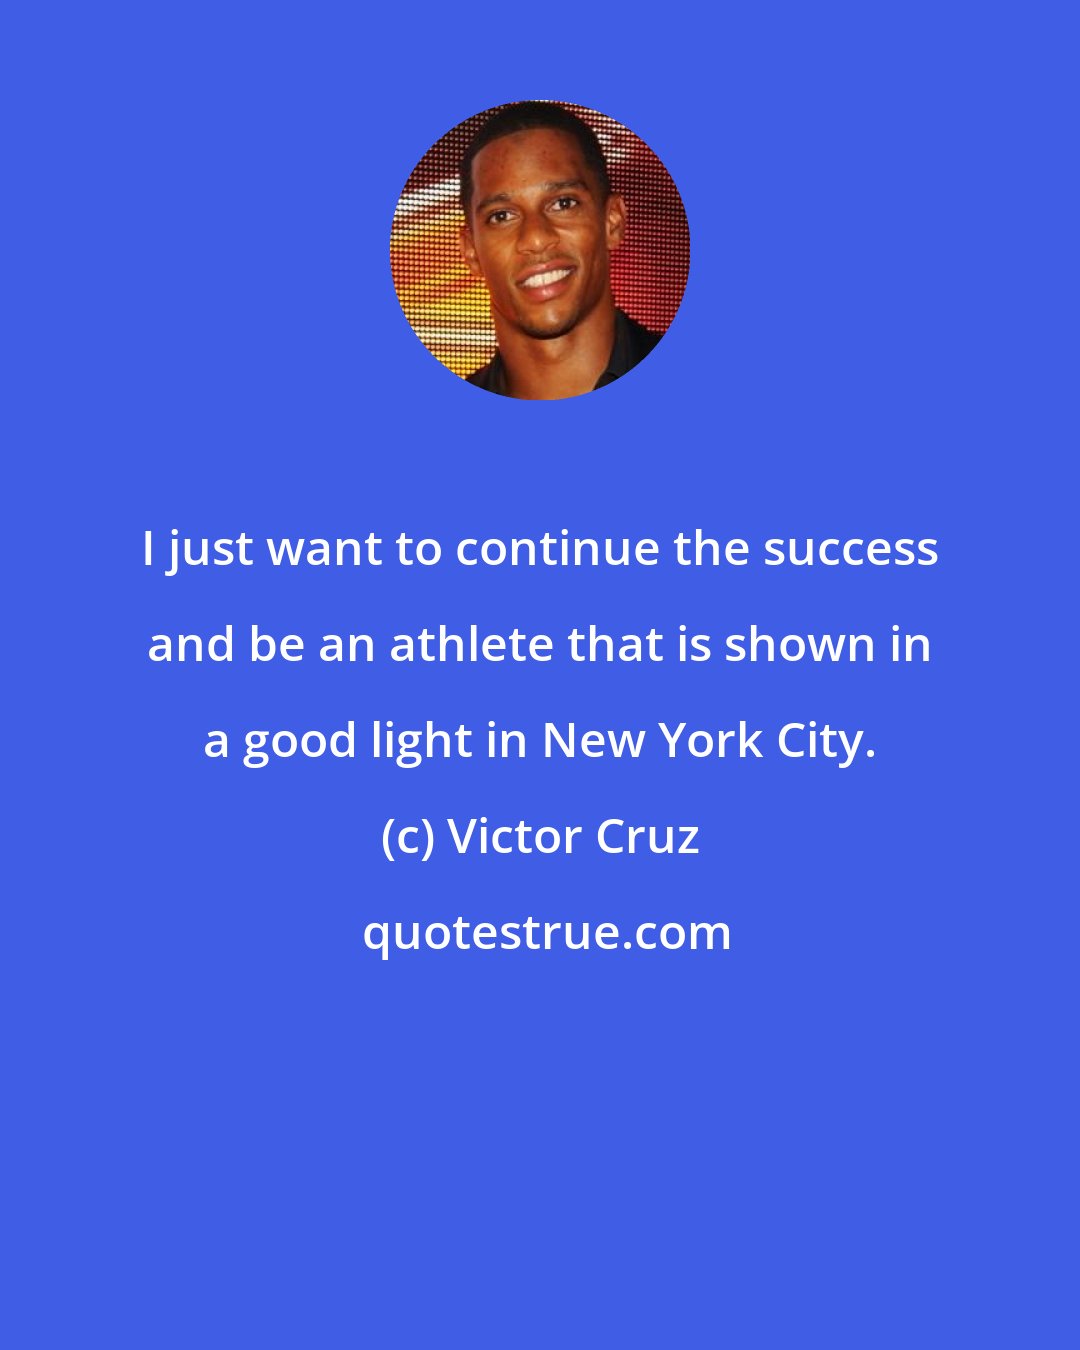 Victor Cruz: I just want to continue the success and be an athlete that is shown in a good light in New York City.